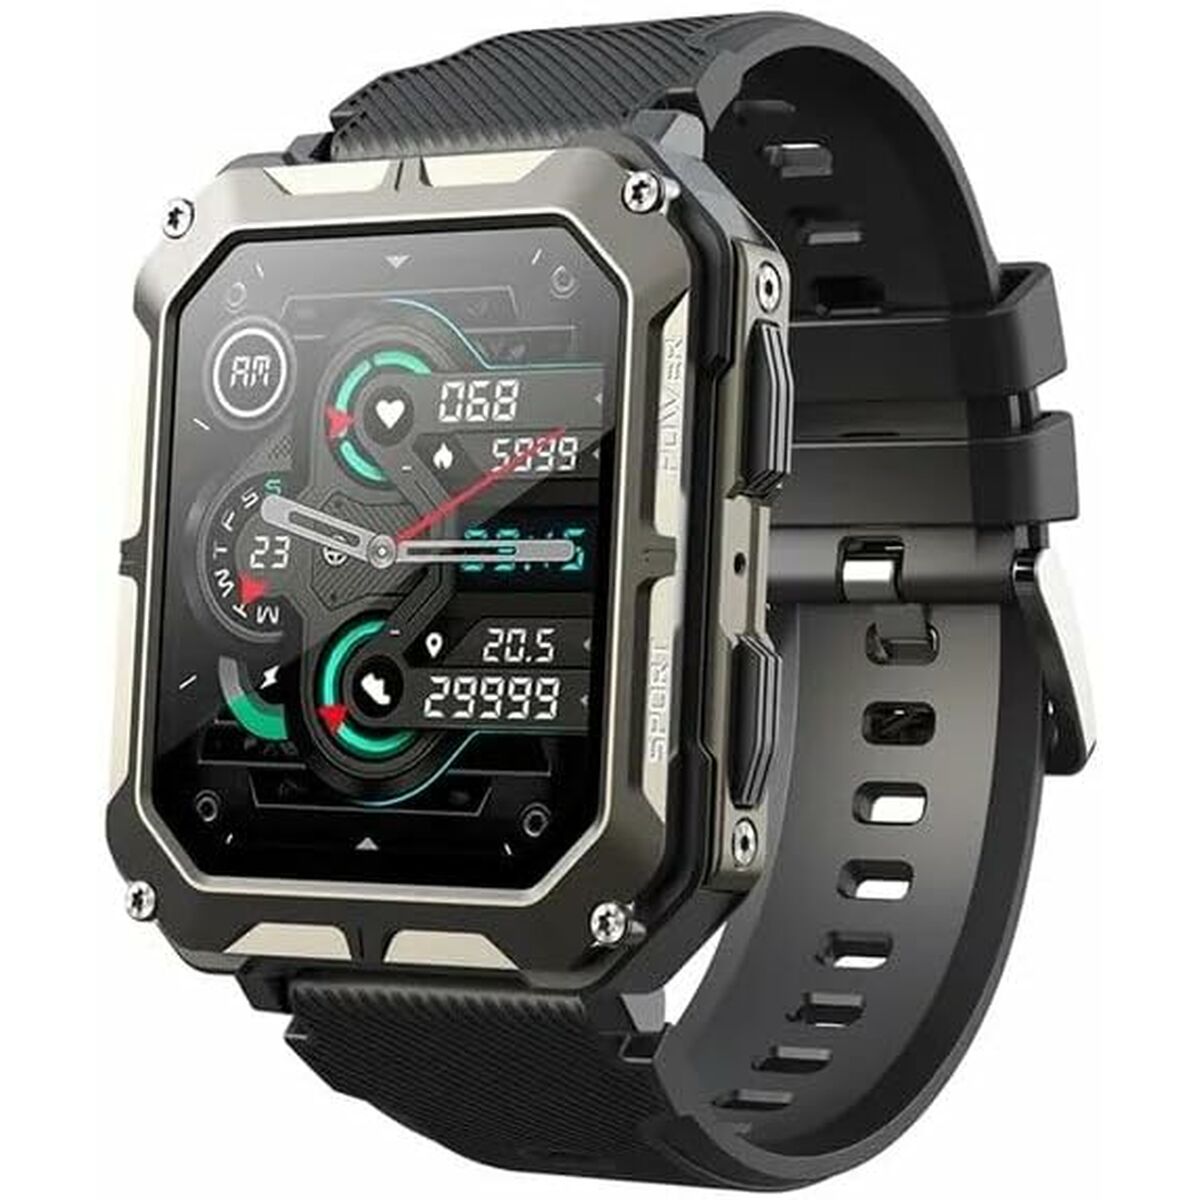 Smartwatch Cubot C20 PRO Black, Cubot, Electronics, smartwatch-cubot-c20-pro-black, :Black, Brand_Cubot, category-reference-2609, category-reference-2617, category-reference-2634, category-reference-t-19653, category-reference-t-4082, Condition_NEW, original gifts, Price_50 - 100, telephones & tablets, Teleworking, wifi y bluetooth, RiotNook